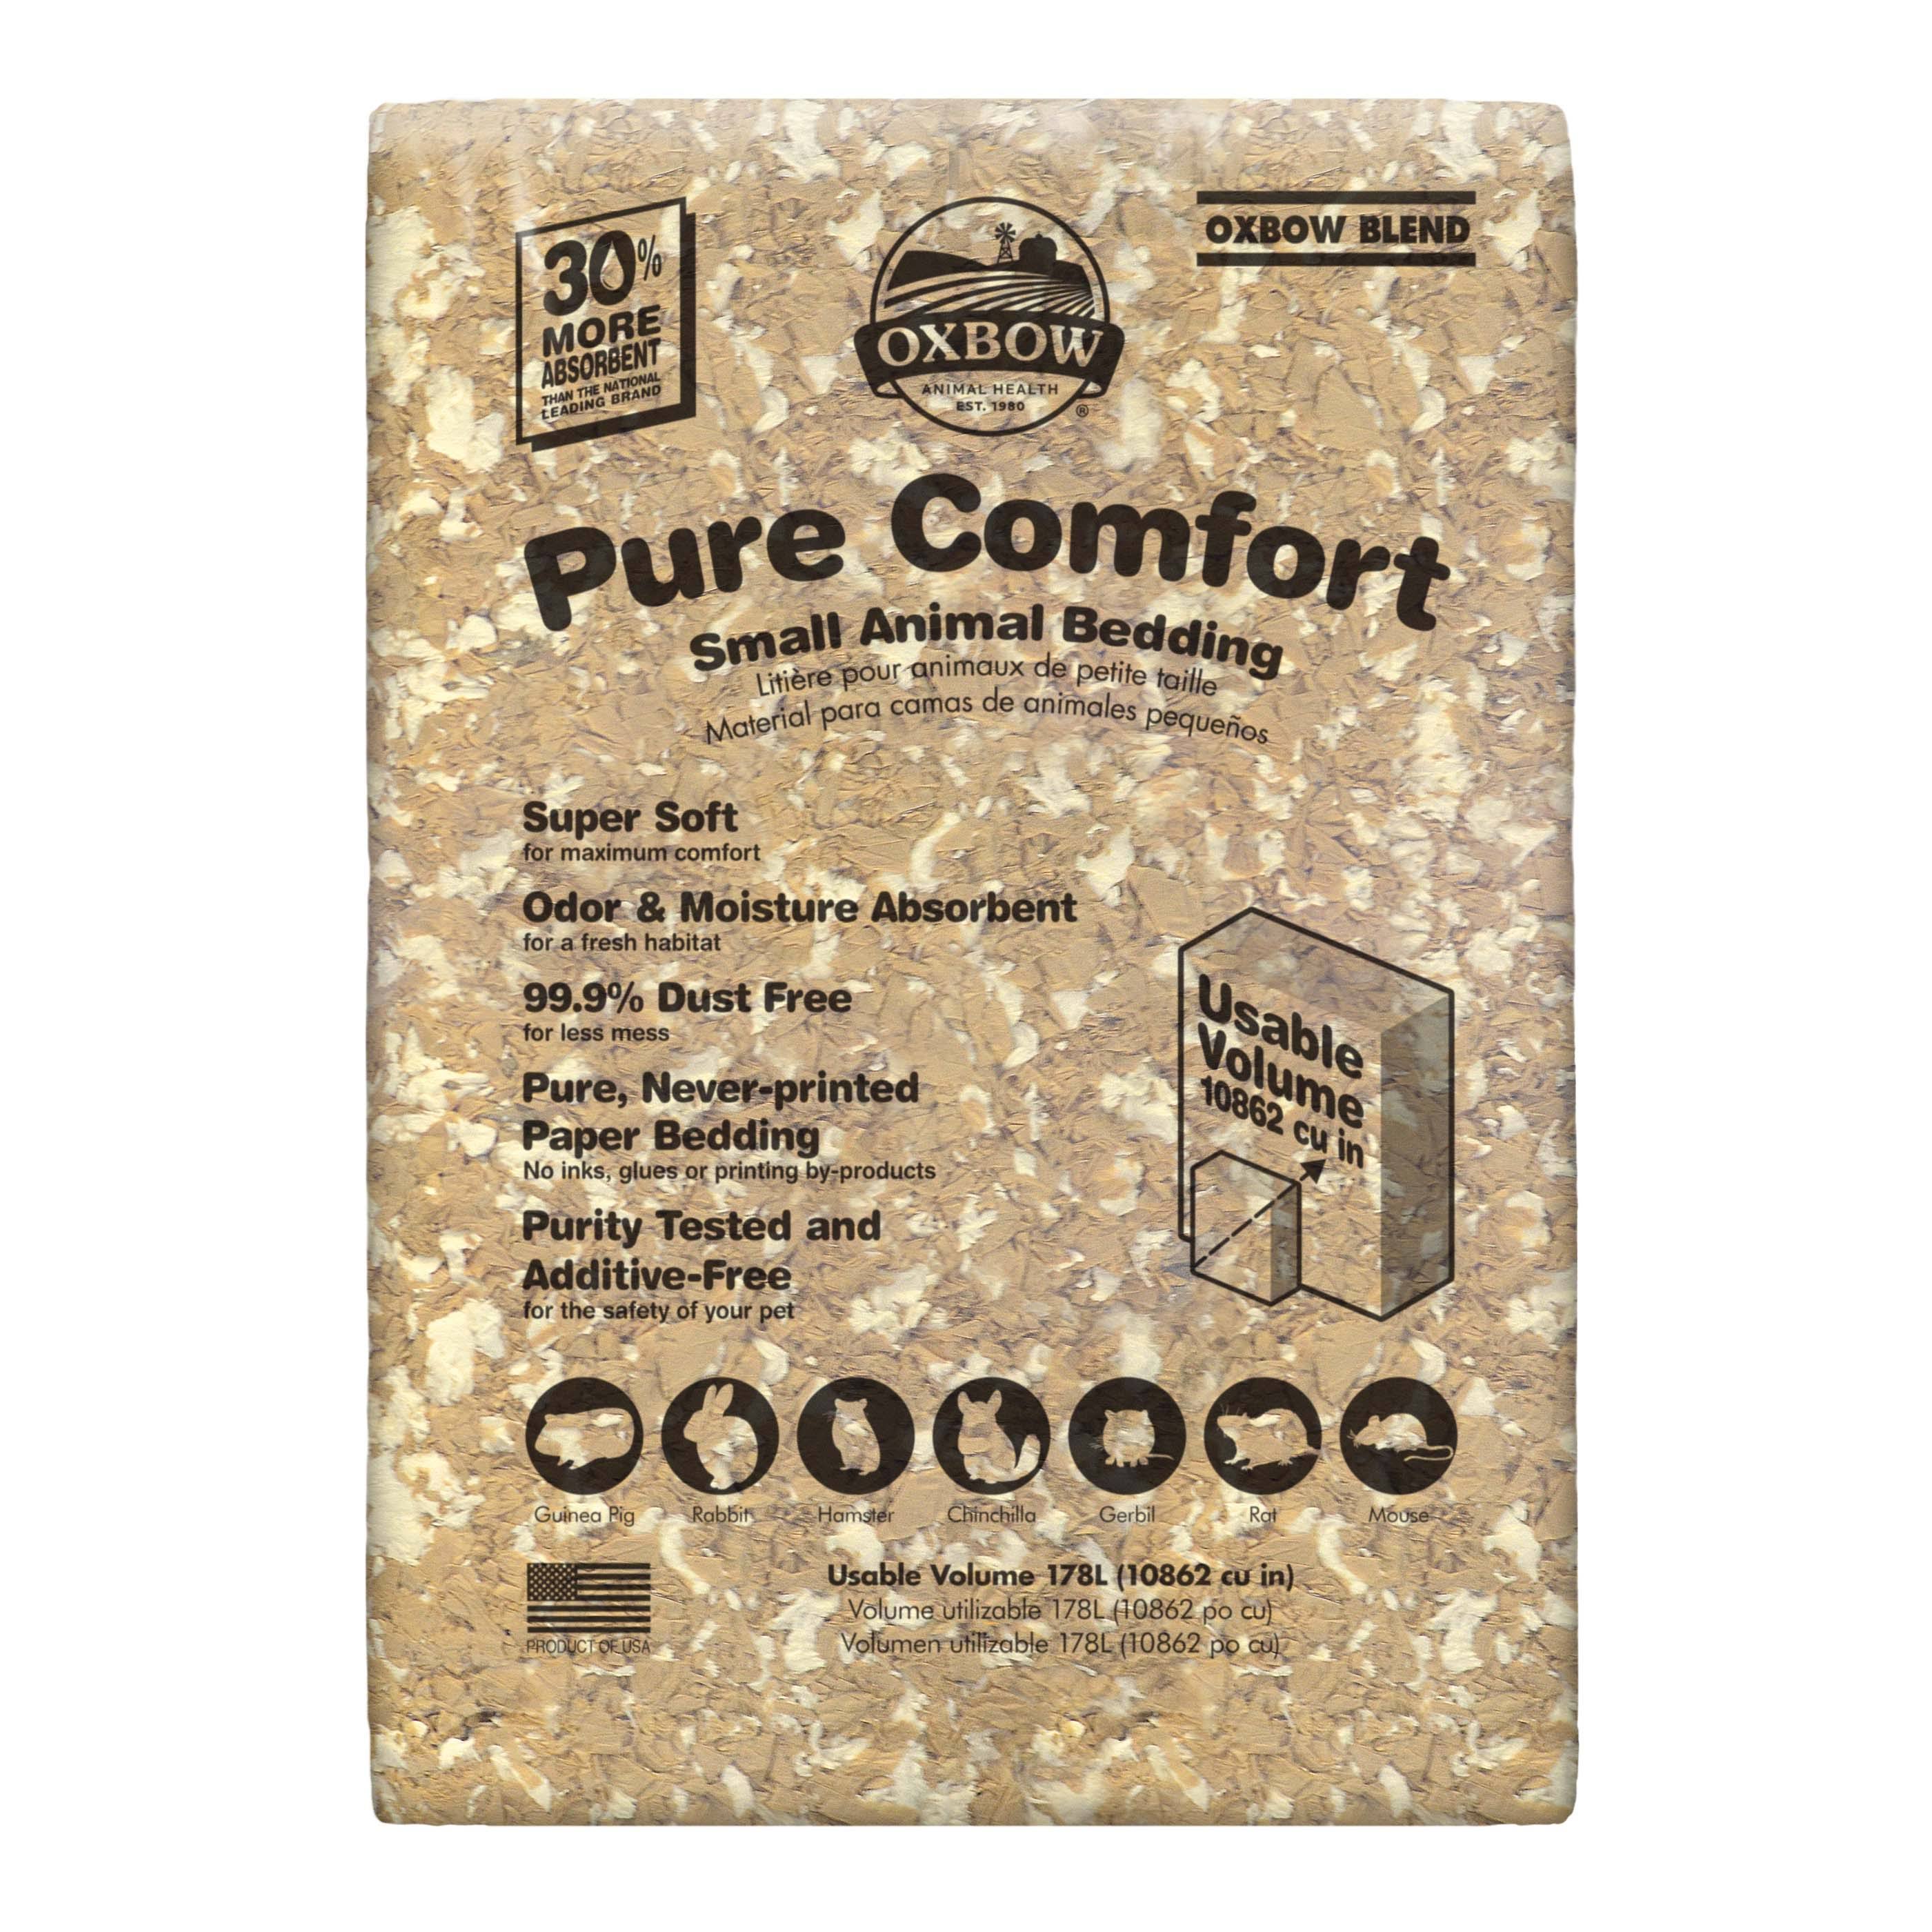 Oxbow Pure Comfort Bedding - Oxbow Blend, 127l